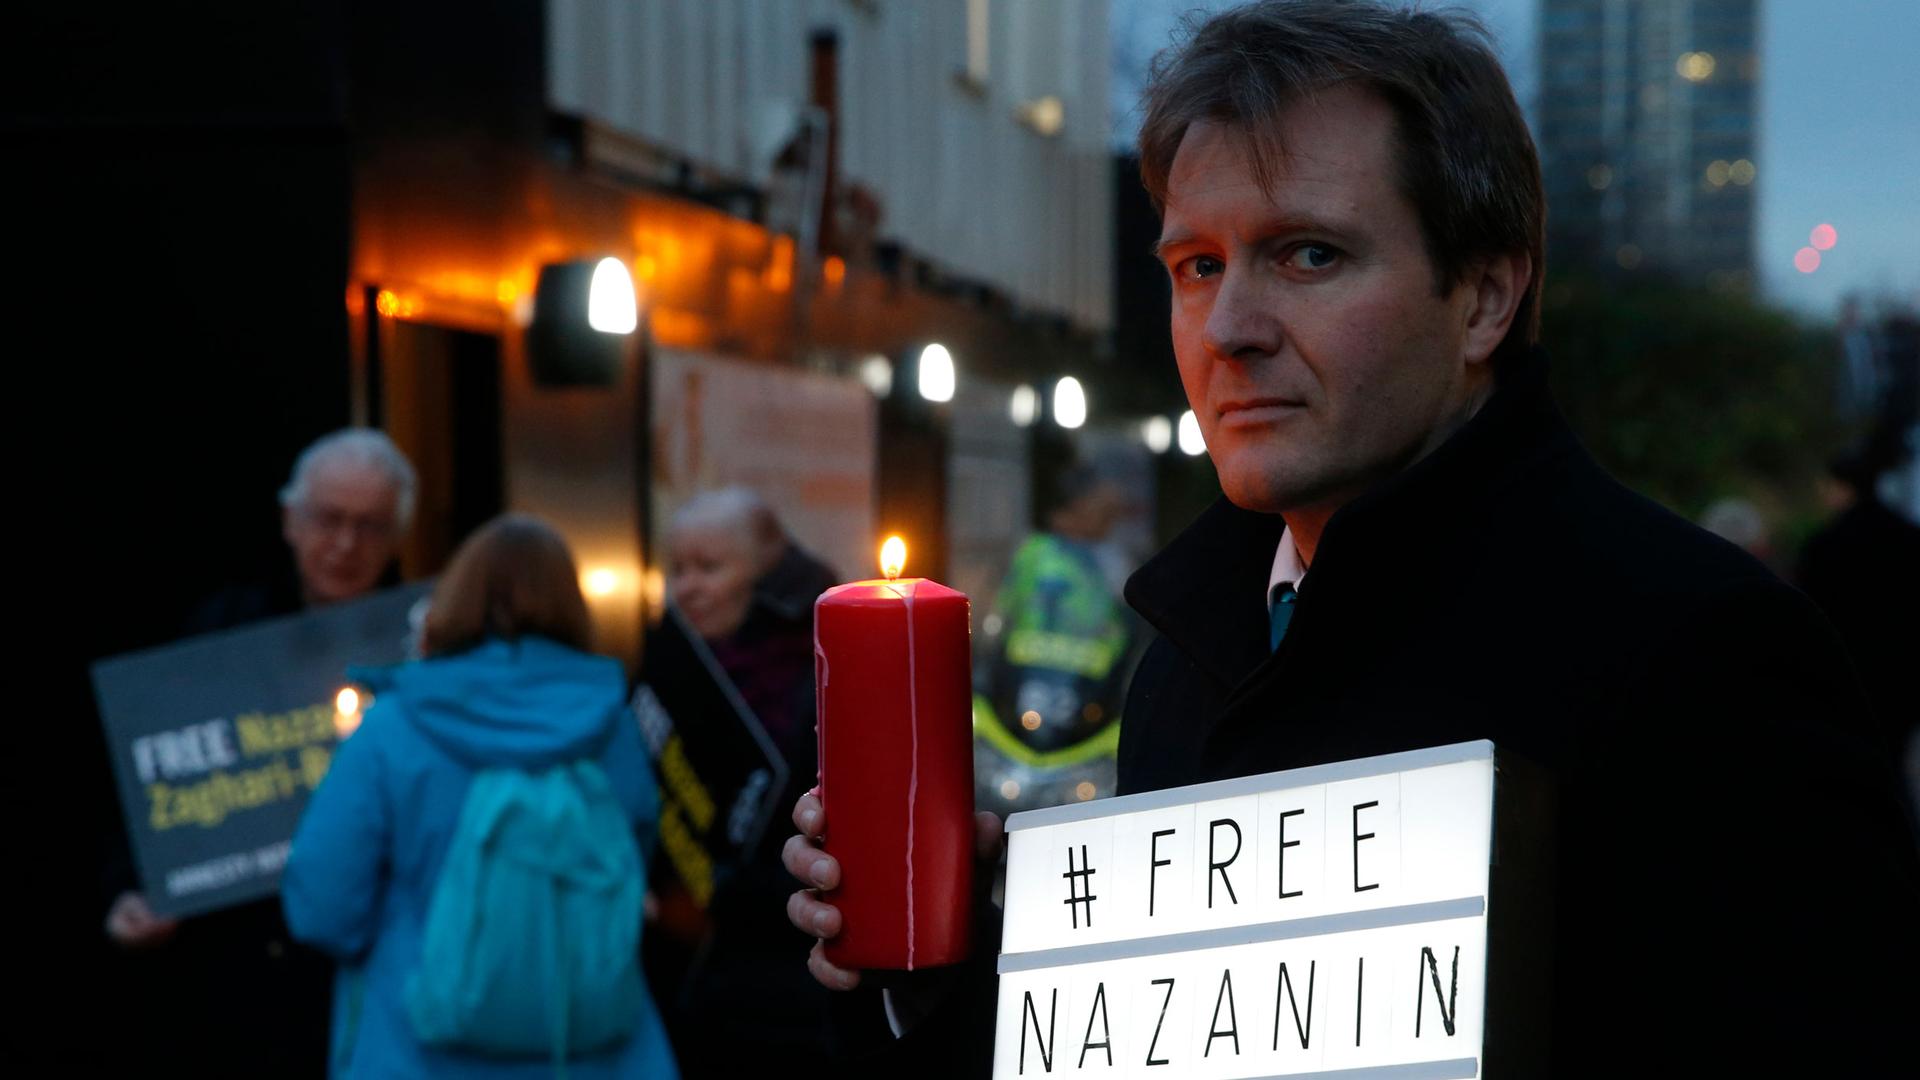 Richard Ratcliffe is shown holding a red candle and a sign that says #Free Nazanin on it.